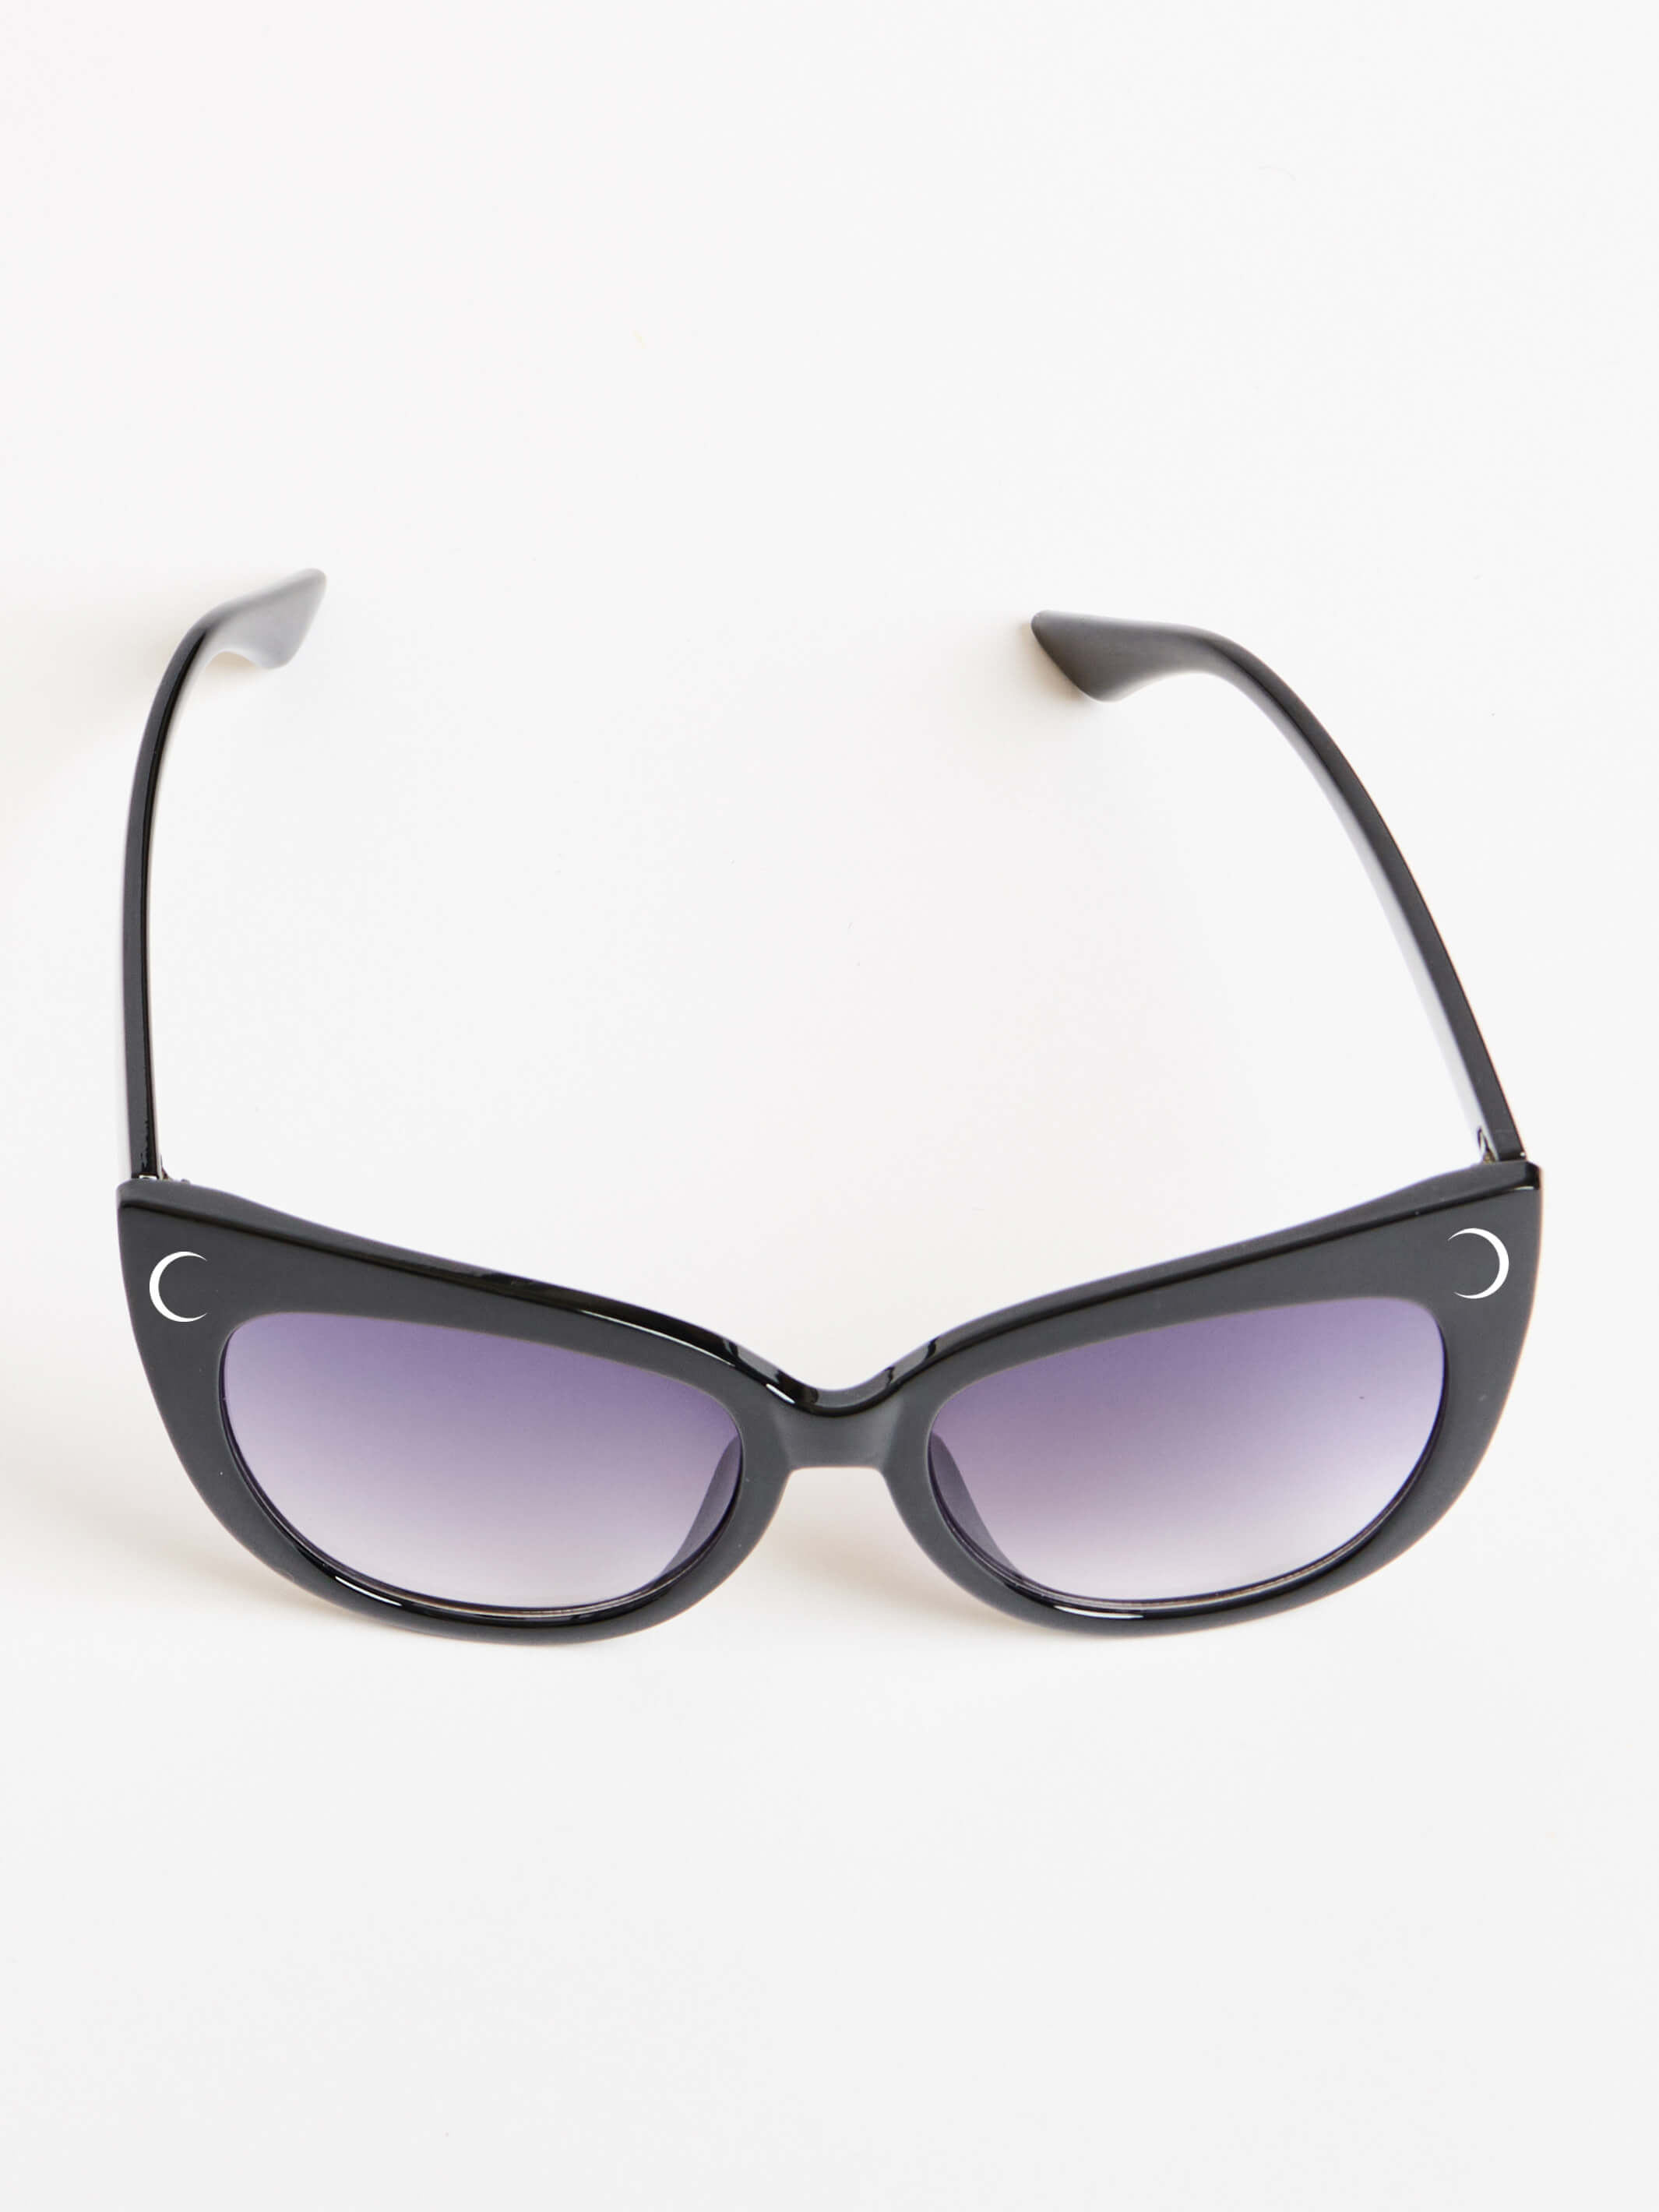 oversized cat eye sunglasses and with clean slick lines, featuring our signature Crescent Moon Logo on front right corner and Midnight Hour logo on the side. 